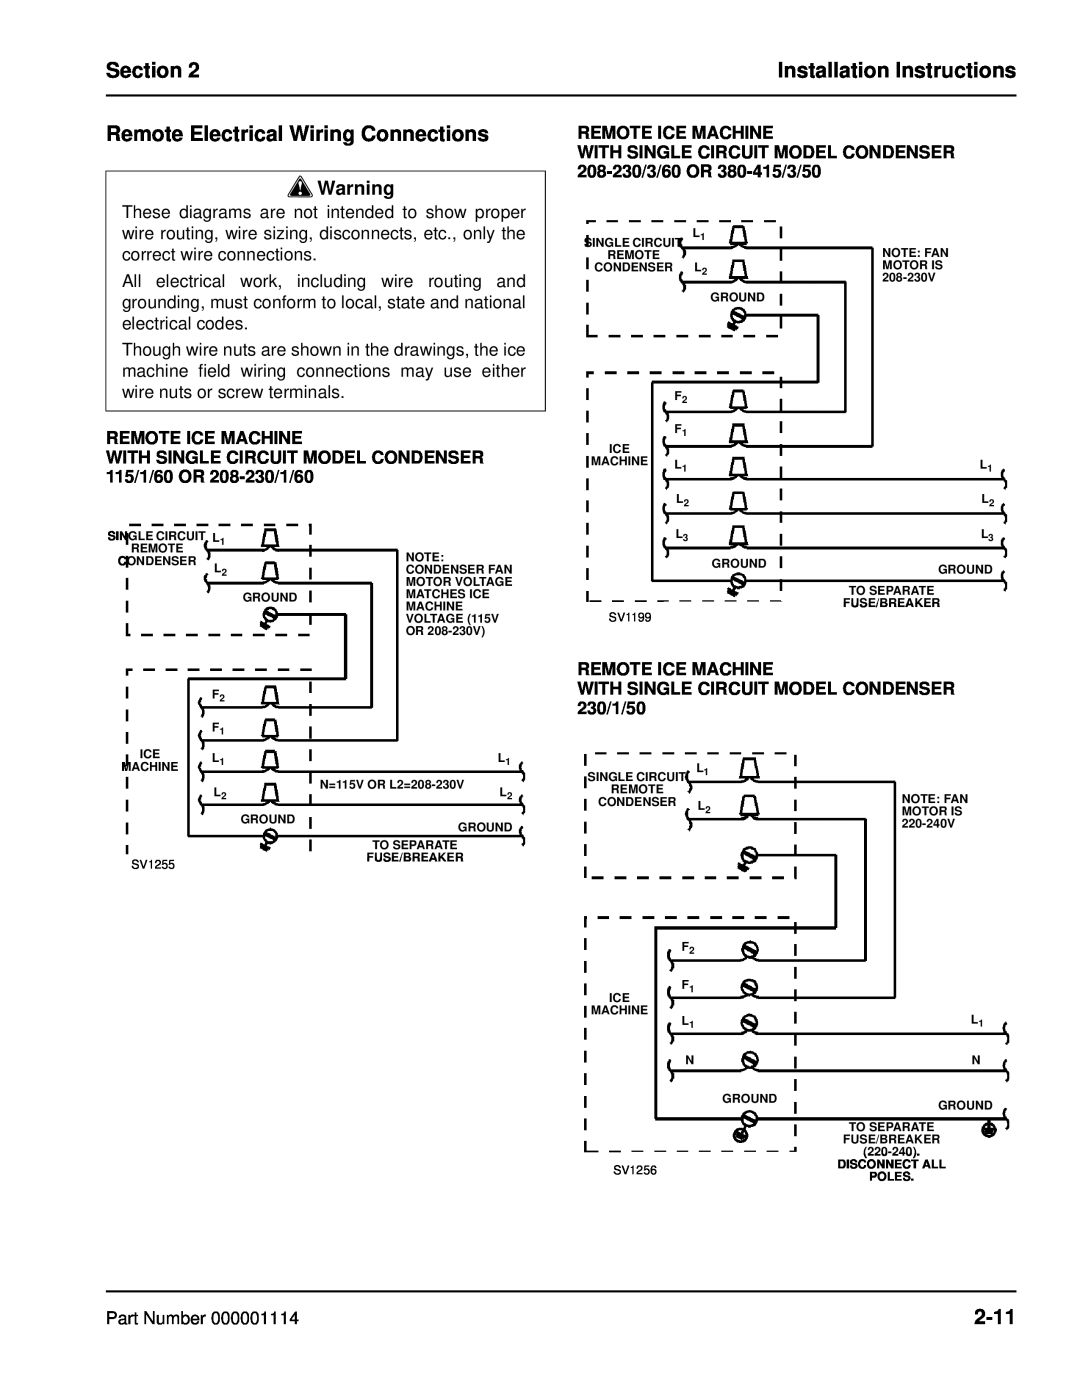 Manitowoc Ice Q manual Remote Electrical Wiring Connections, 2-11, Remote Ice Machine, Section, Installation Instructions 